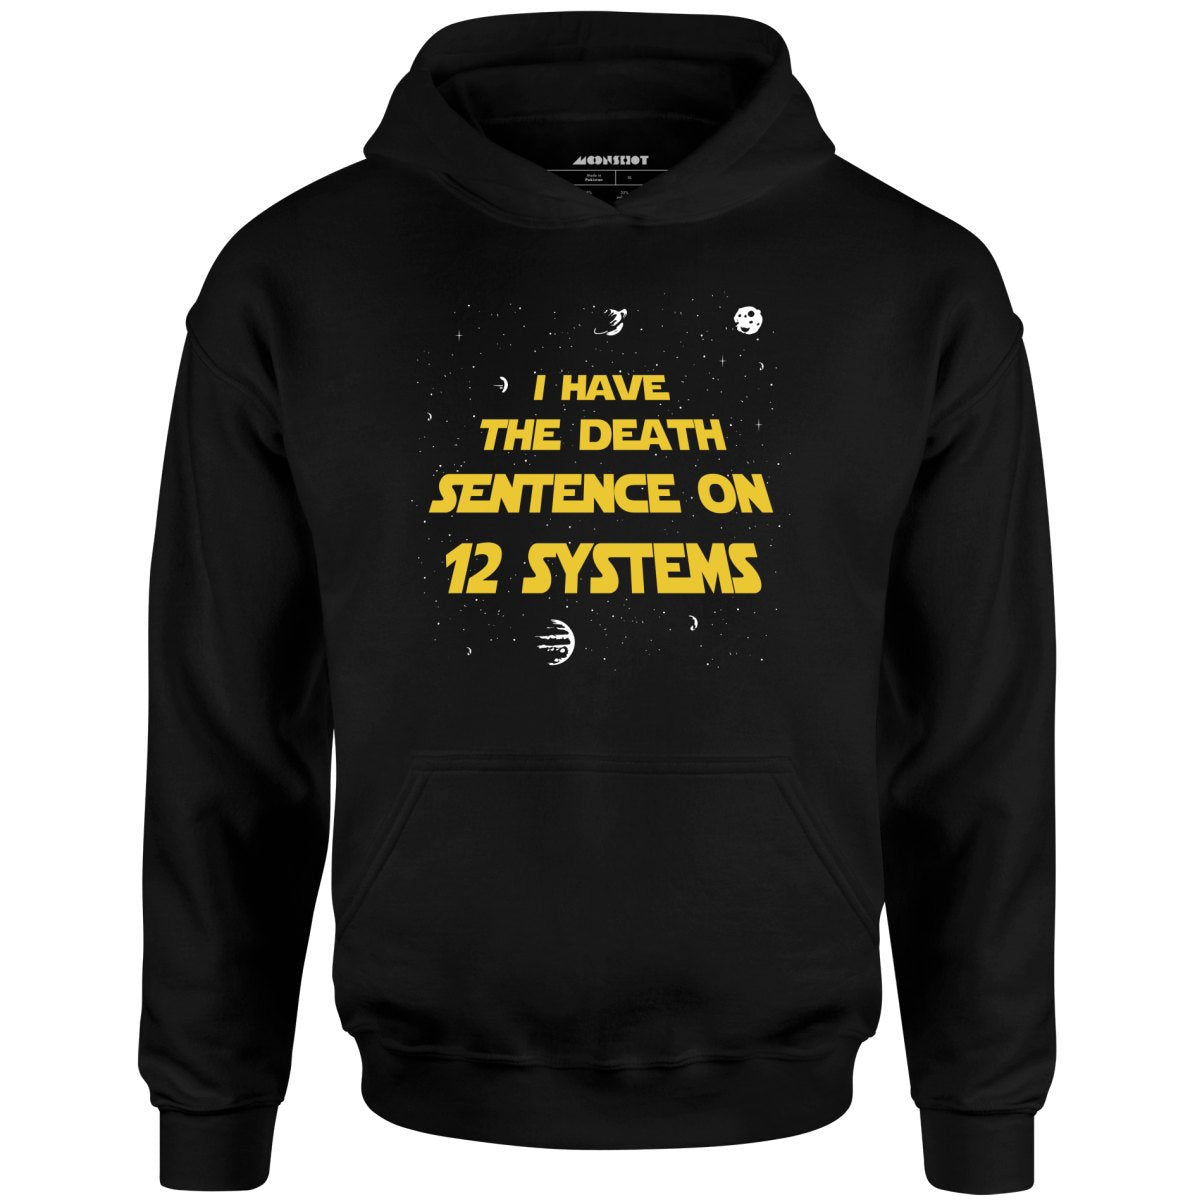 I Have the Death Sentence on 12 Systems v2 - Unisex Hoodie